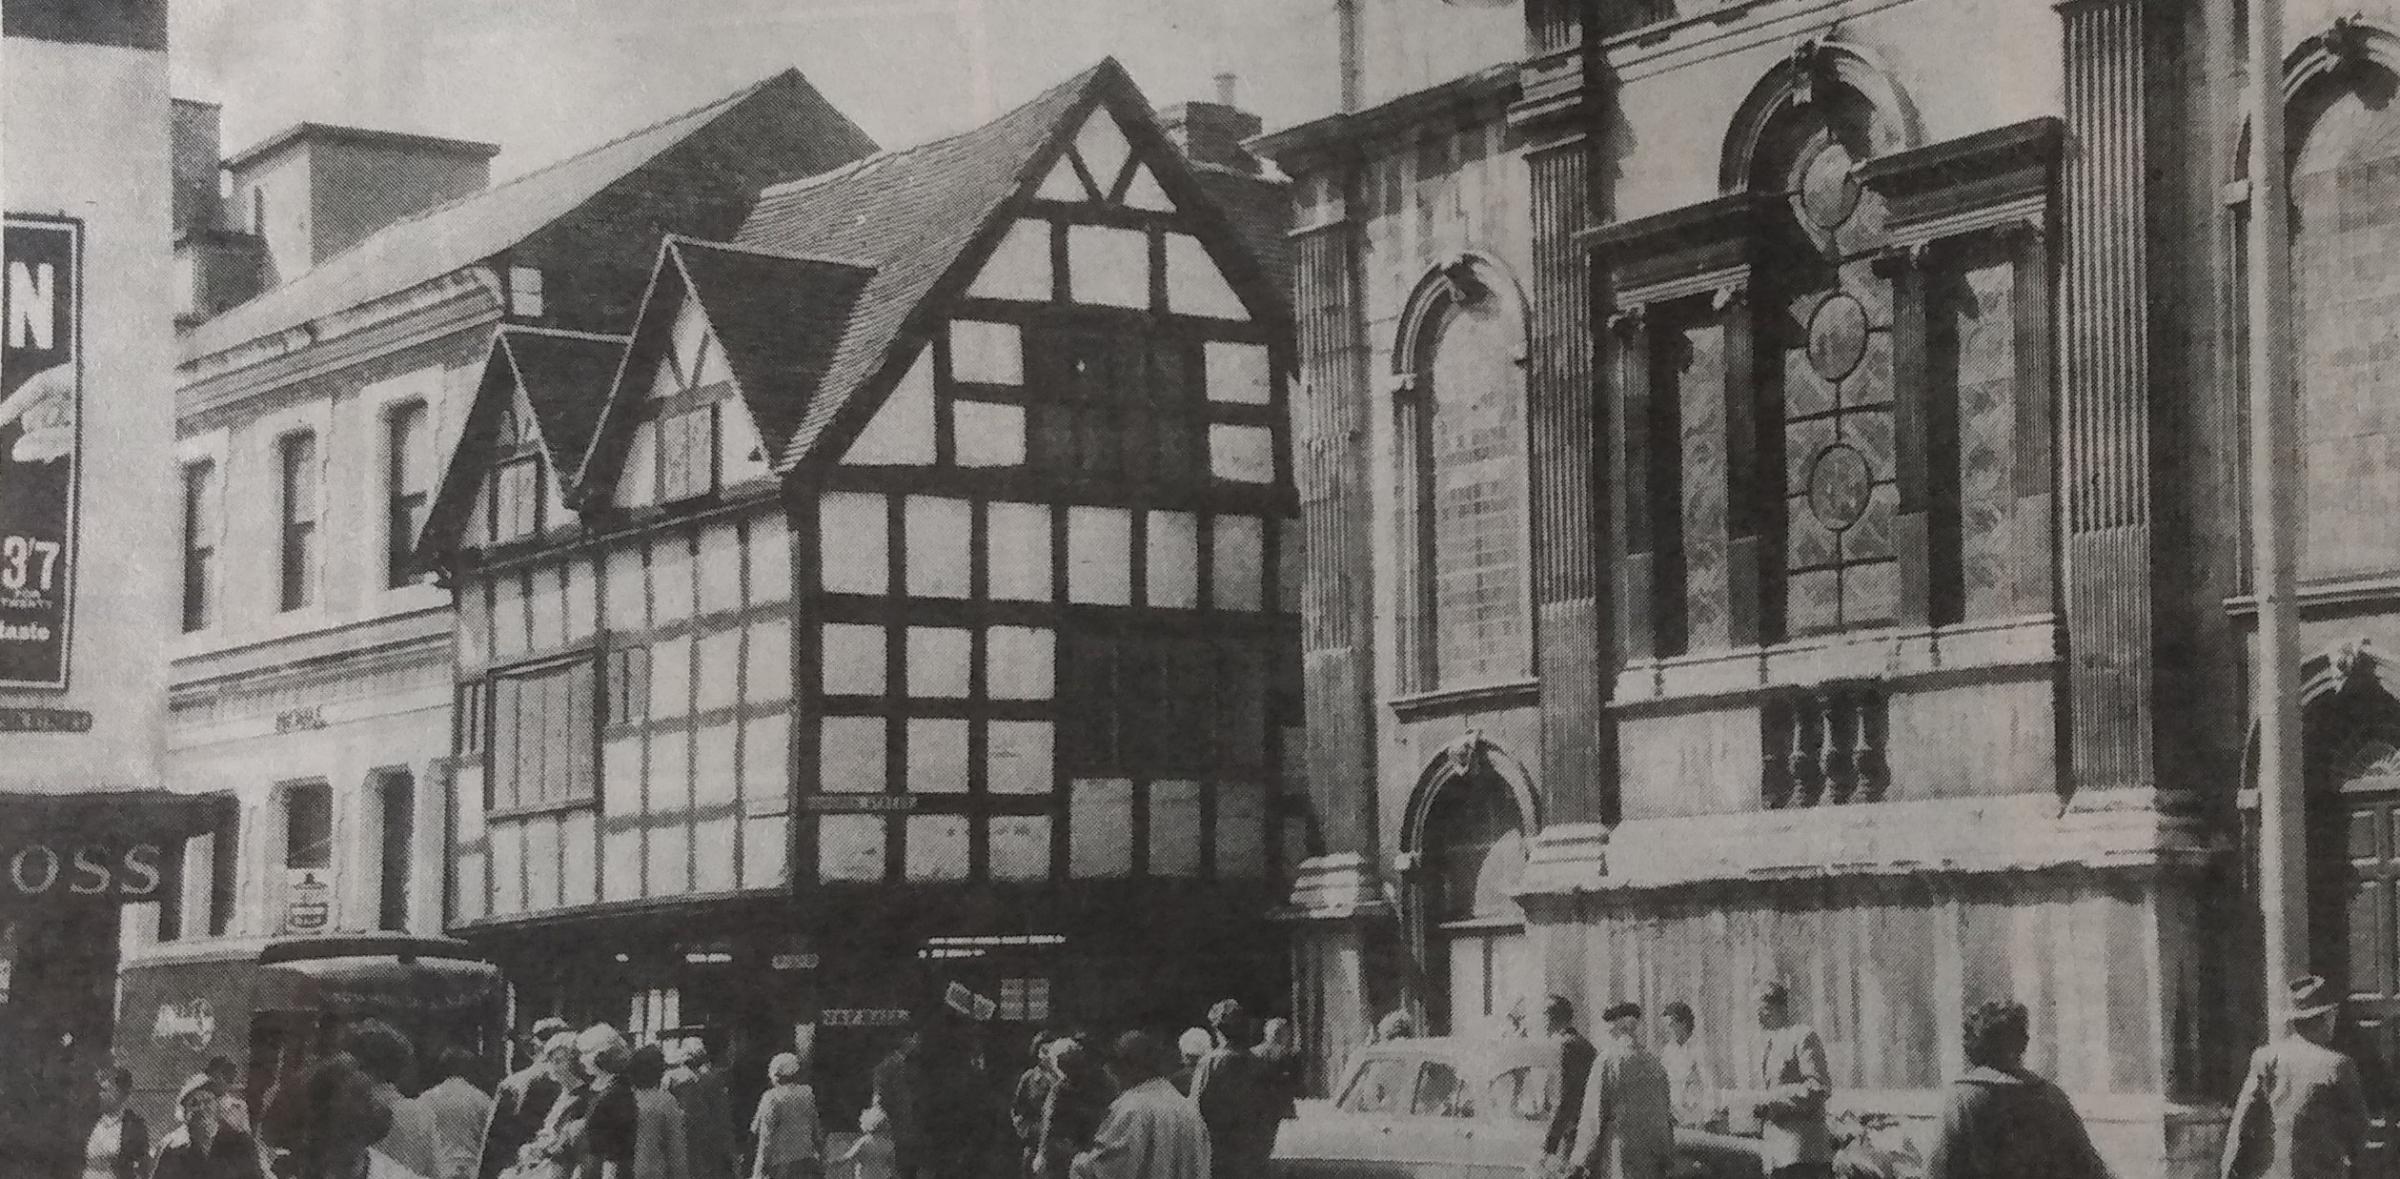 Michael Dowtys image from 1961 shows the black and white building at the corner of The Shambles and Church Street that housed J and F Hall ironmongers before its demolition